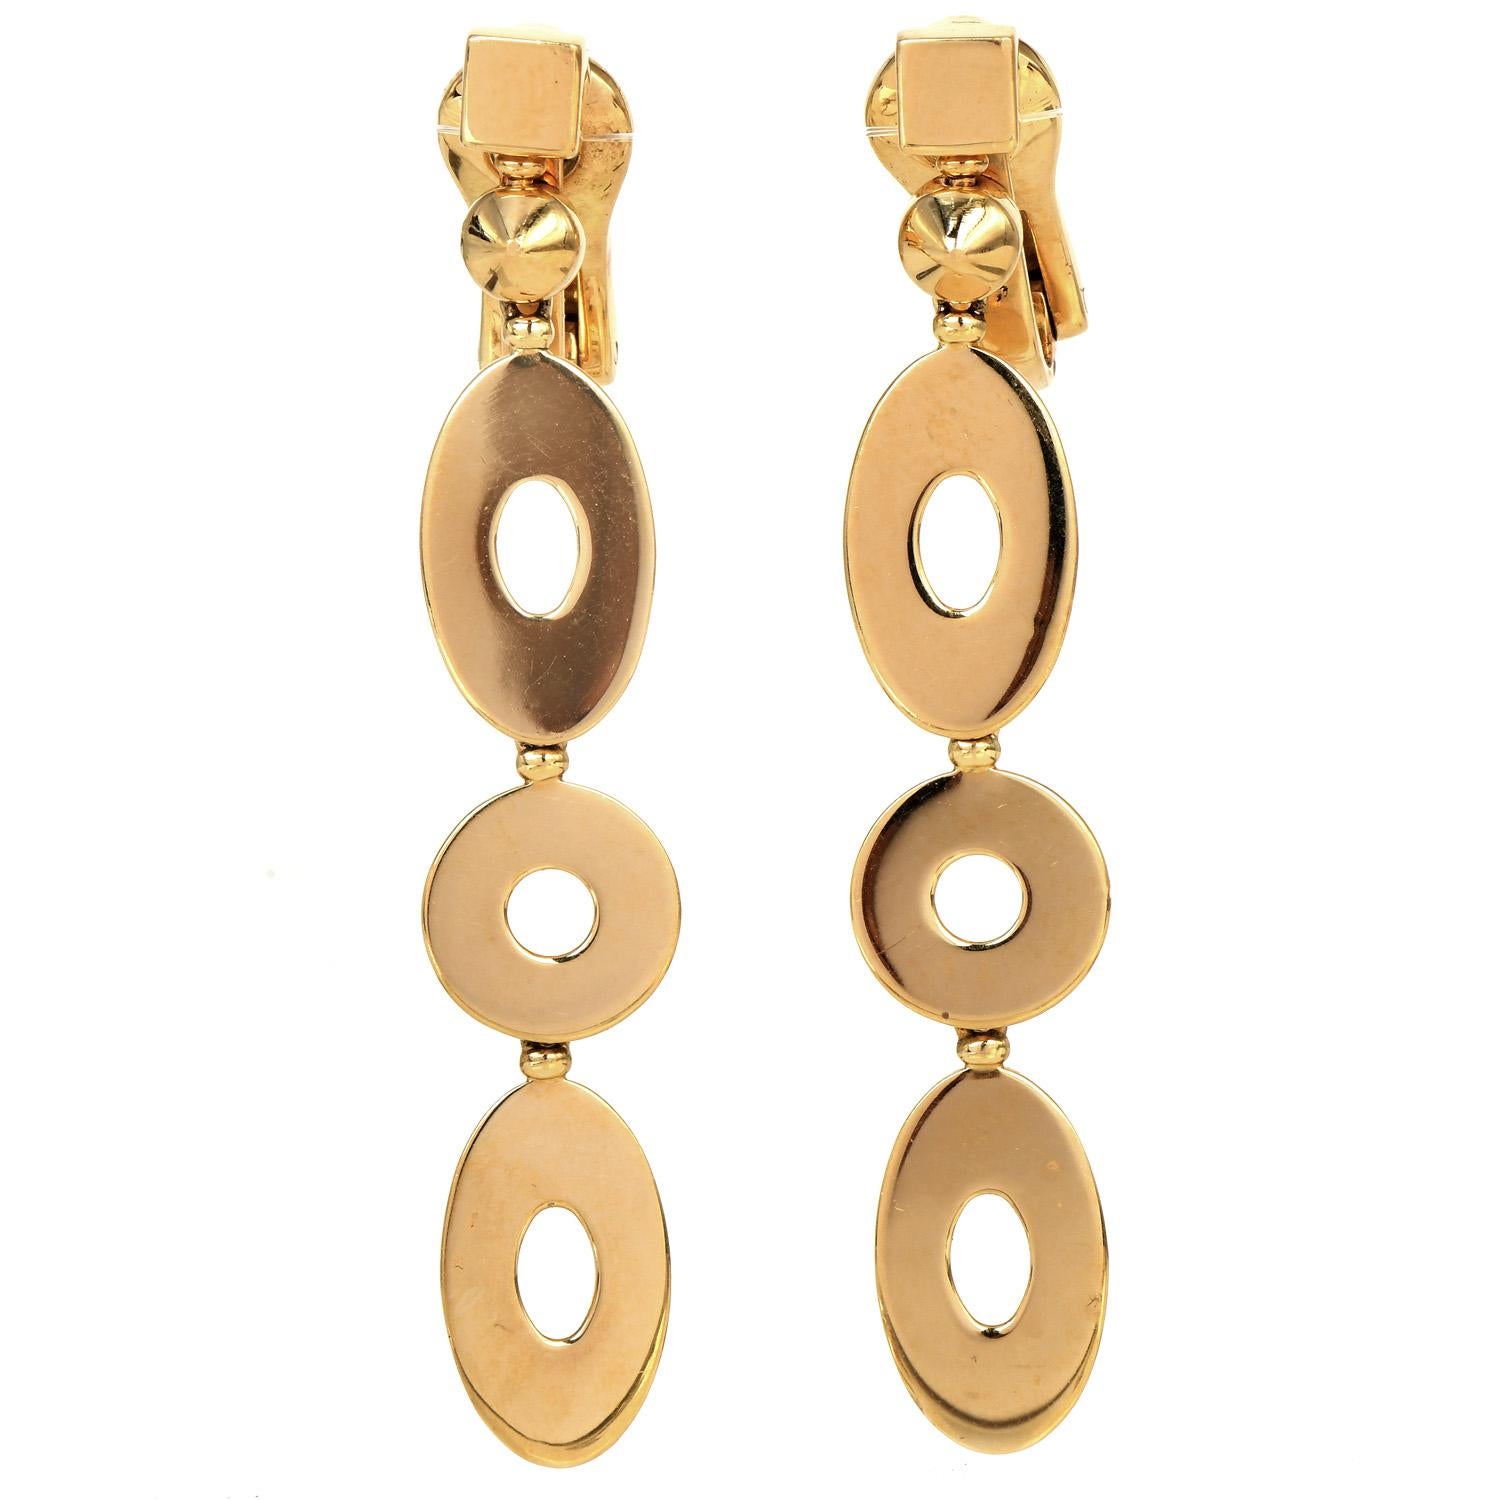 Vintage retro Bvlgari 18K Yellow gold Dangle Earrings.

The Lucea Collections is adorned by Round & Oval-shaped flat disc dangle links with a highly polished finish. 

Crafted in18K yellow gold,

They measure approximately 2